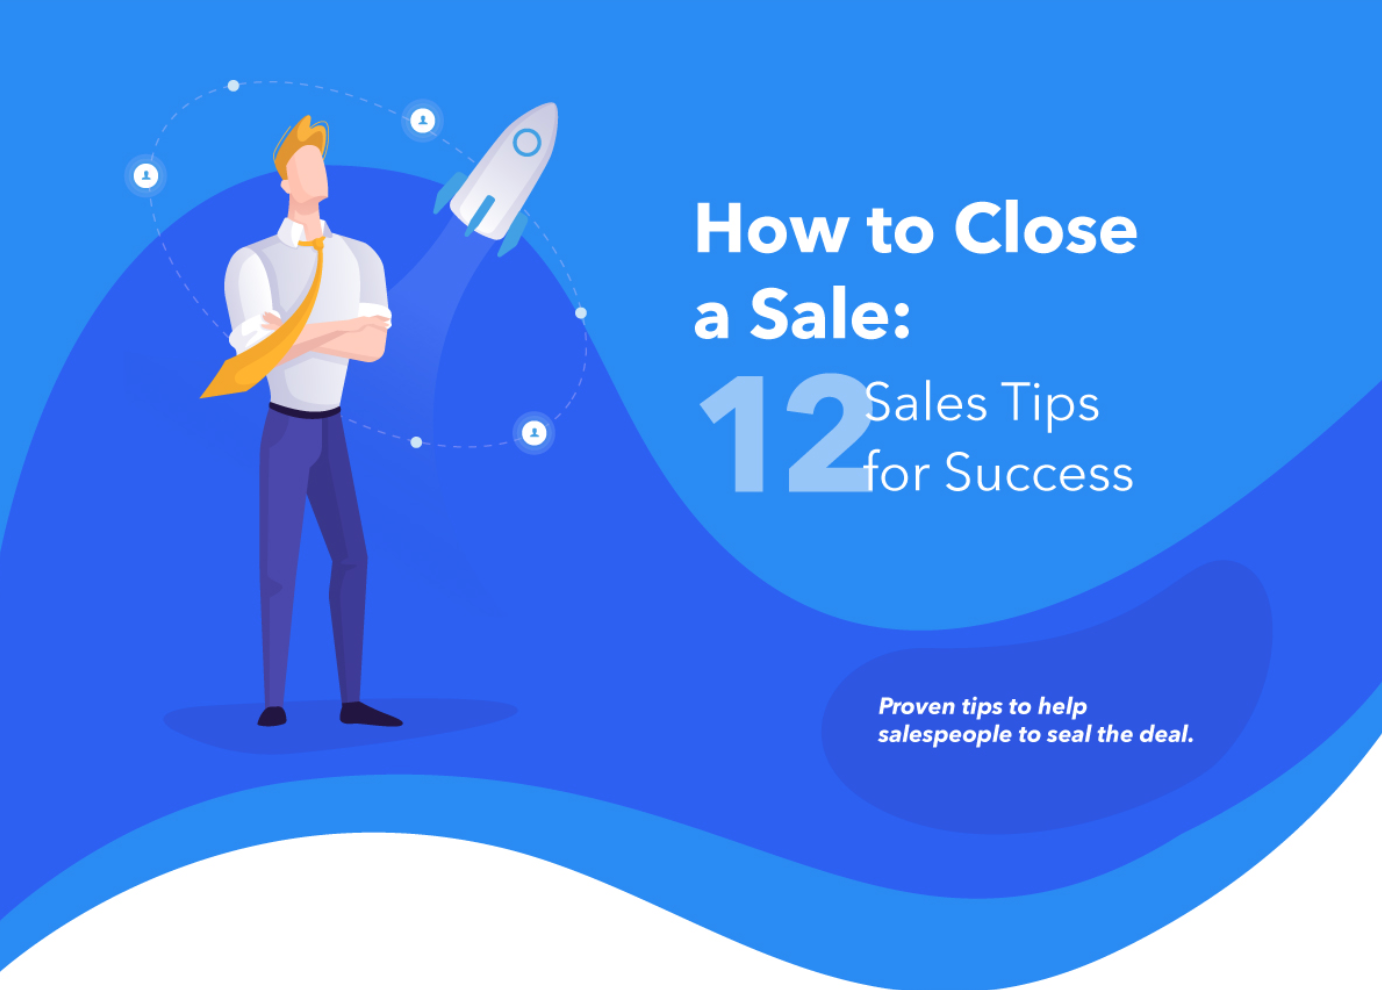 How to Close a Sale: 12 Sales Tips for Success [Infographic]